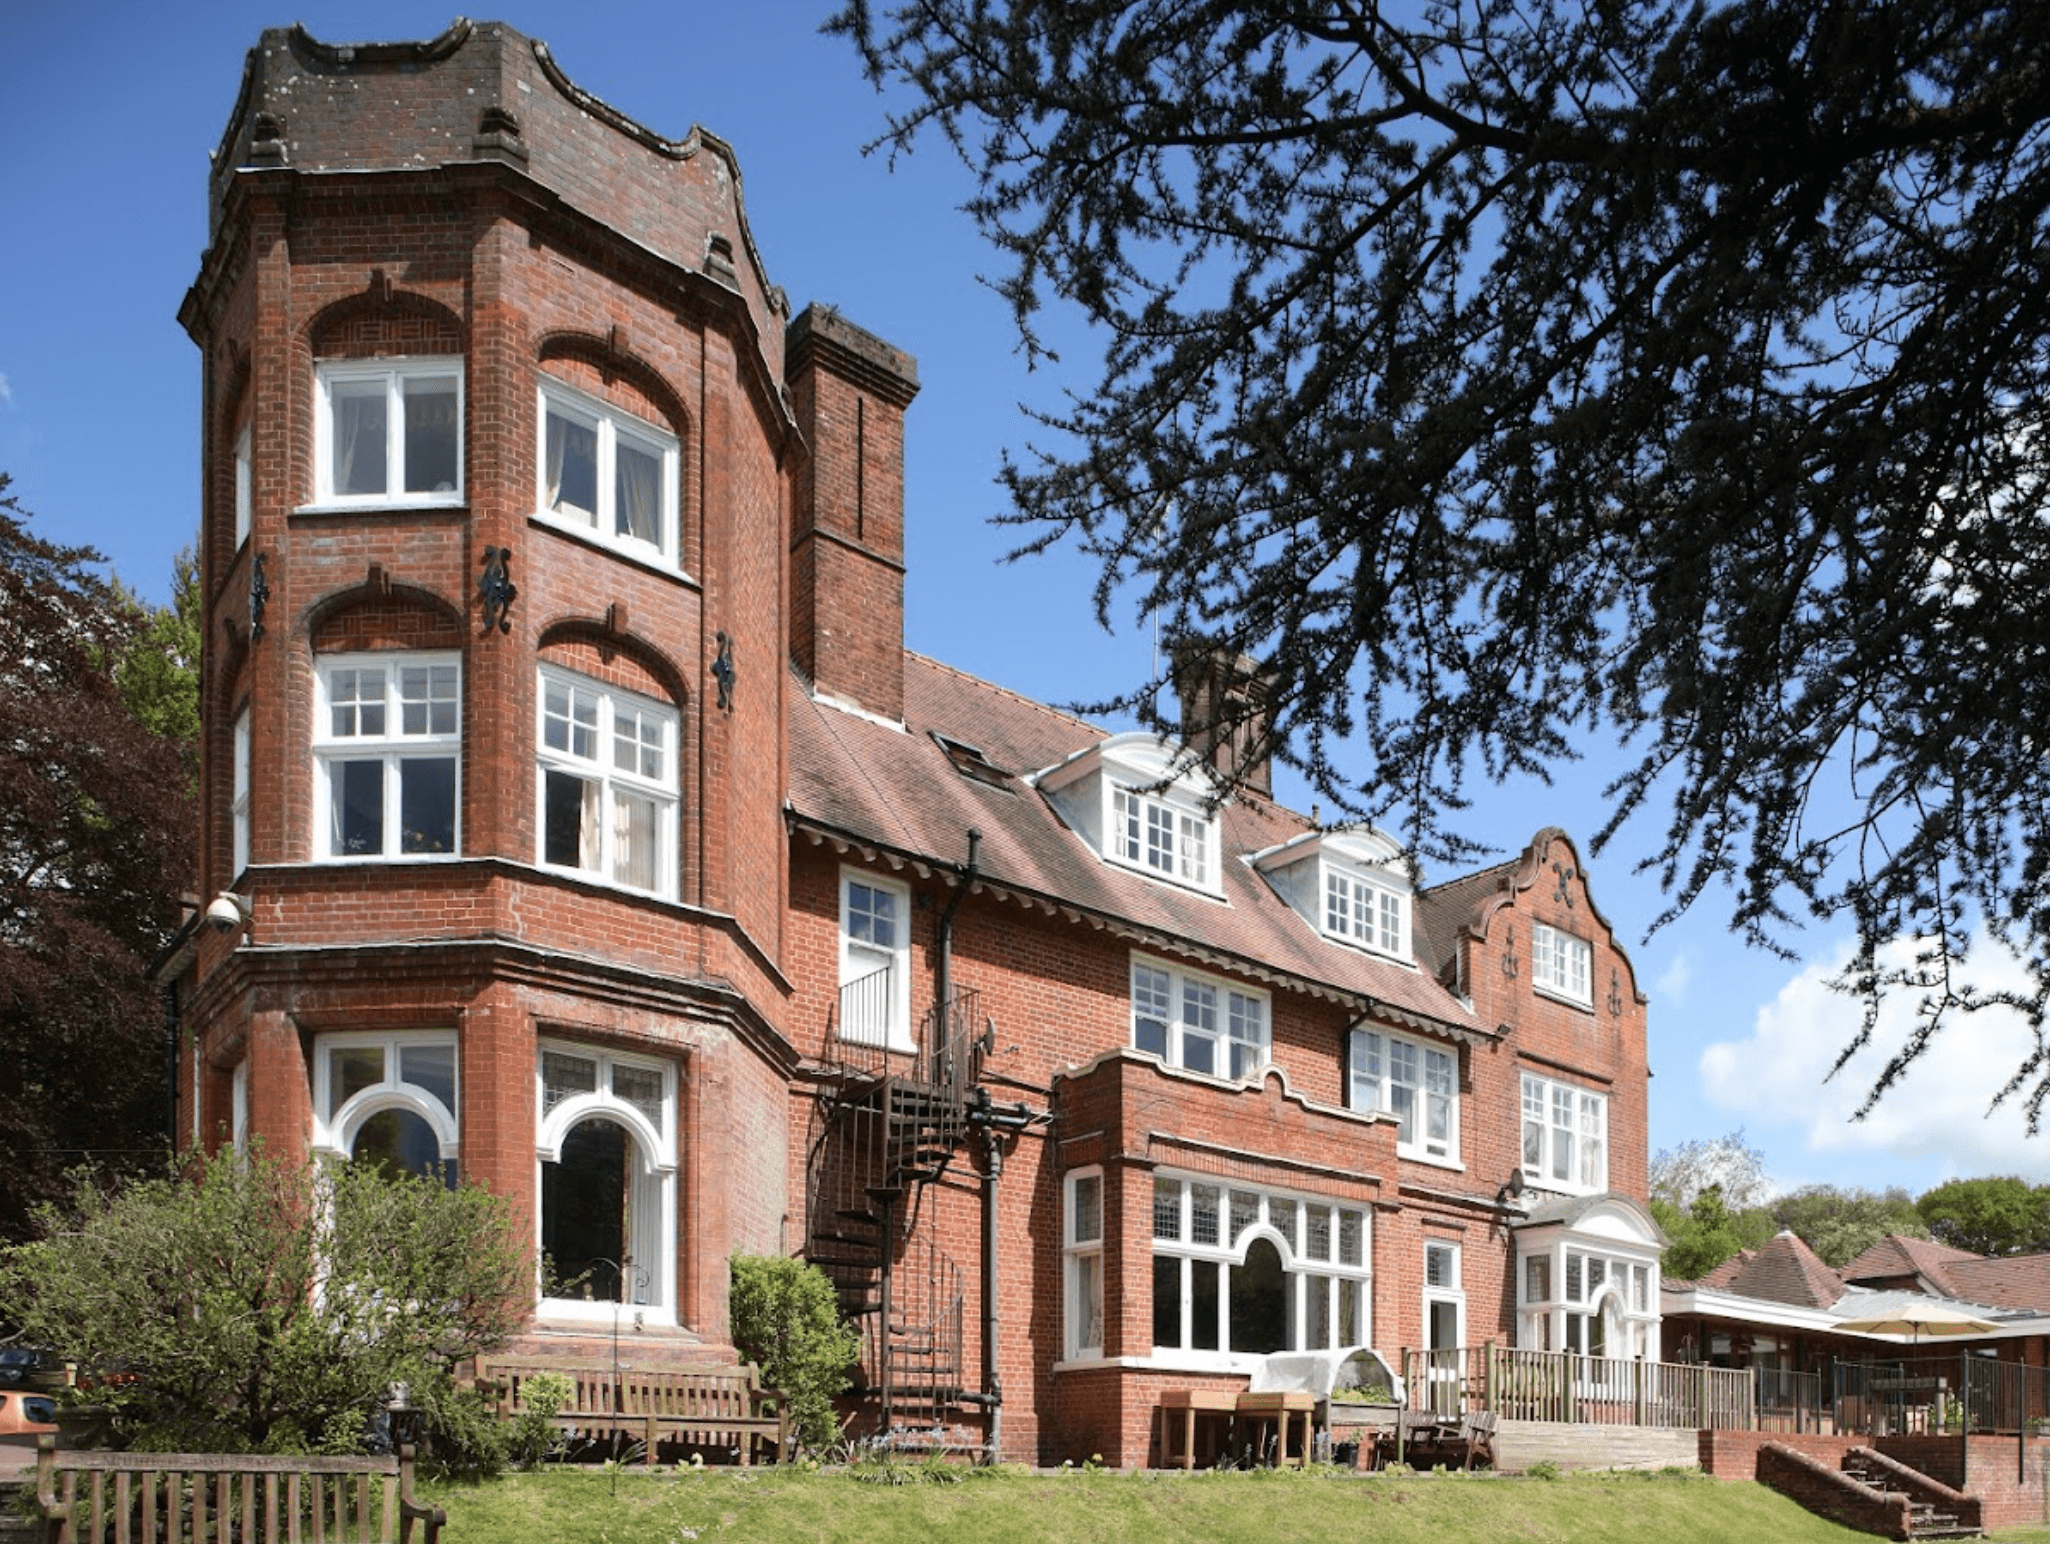 Exterior of Huntington House in Surrey